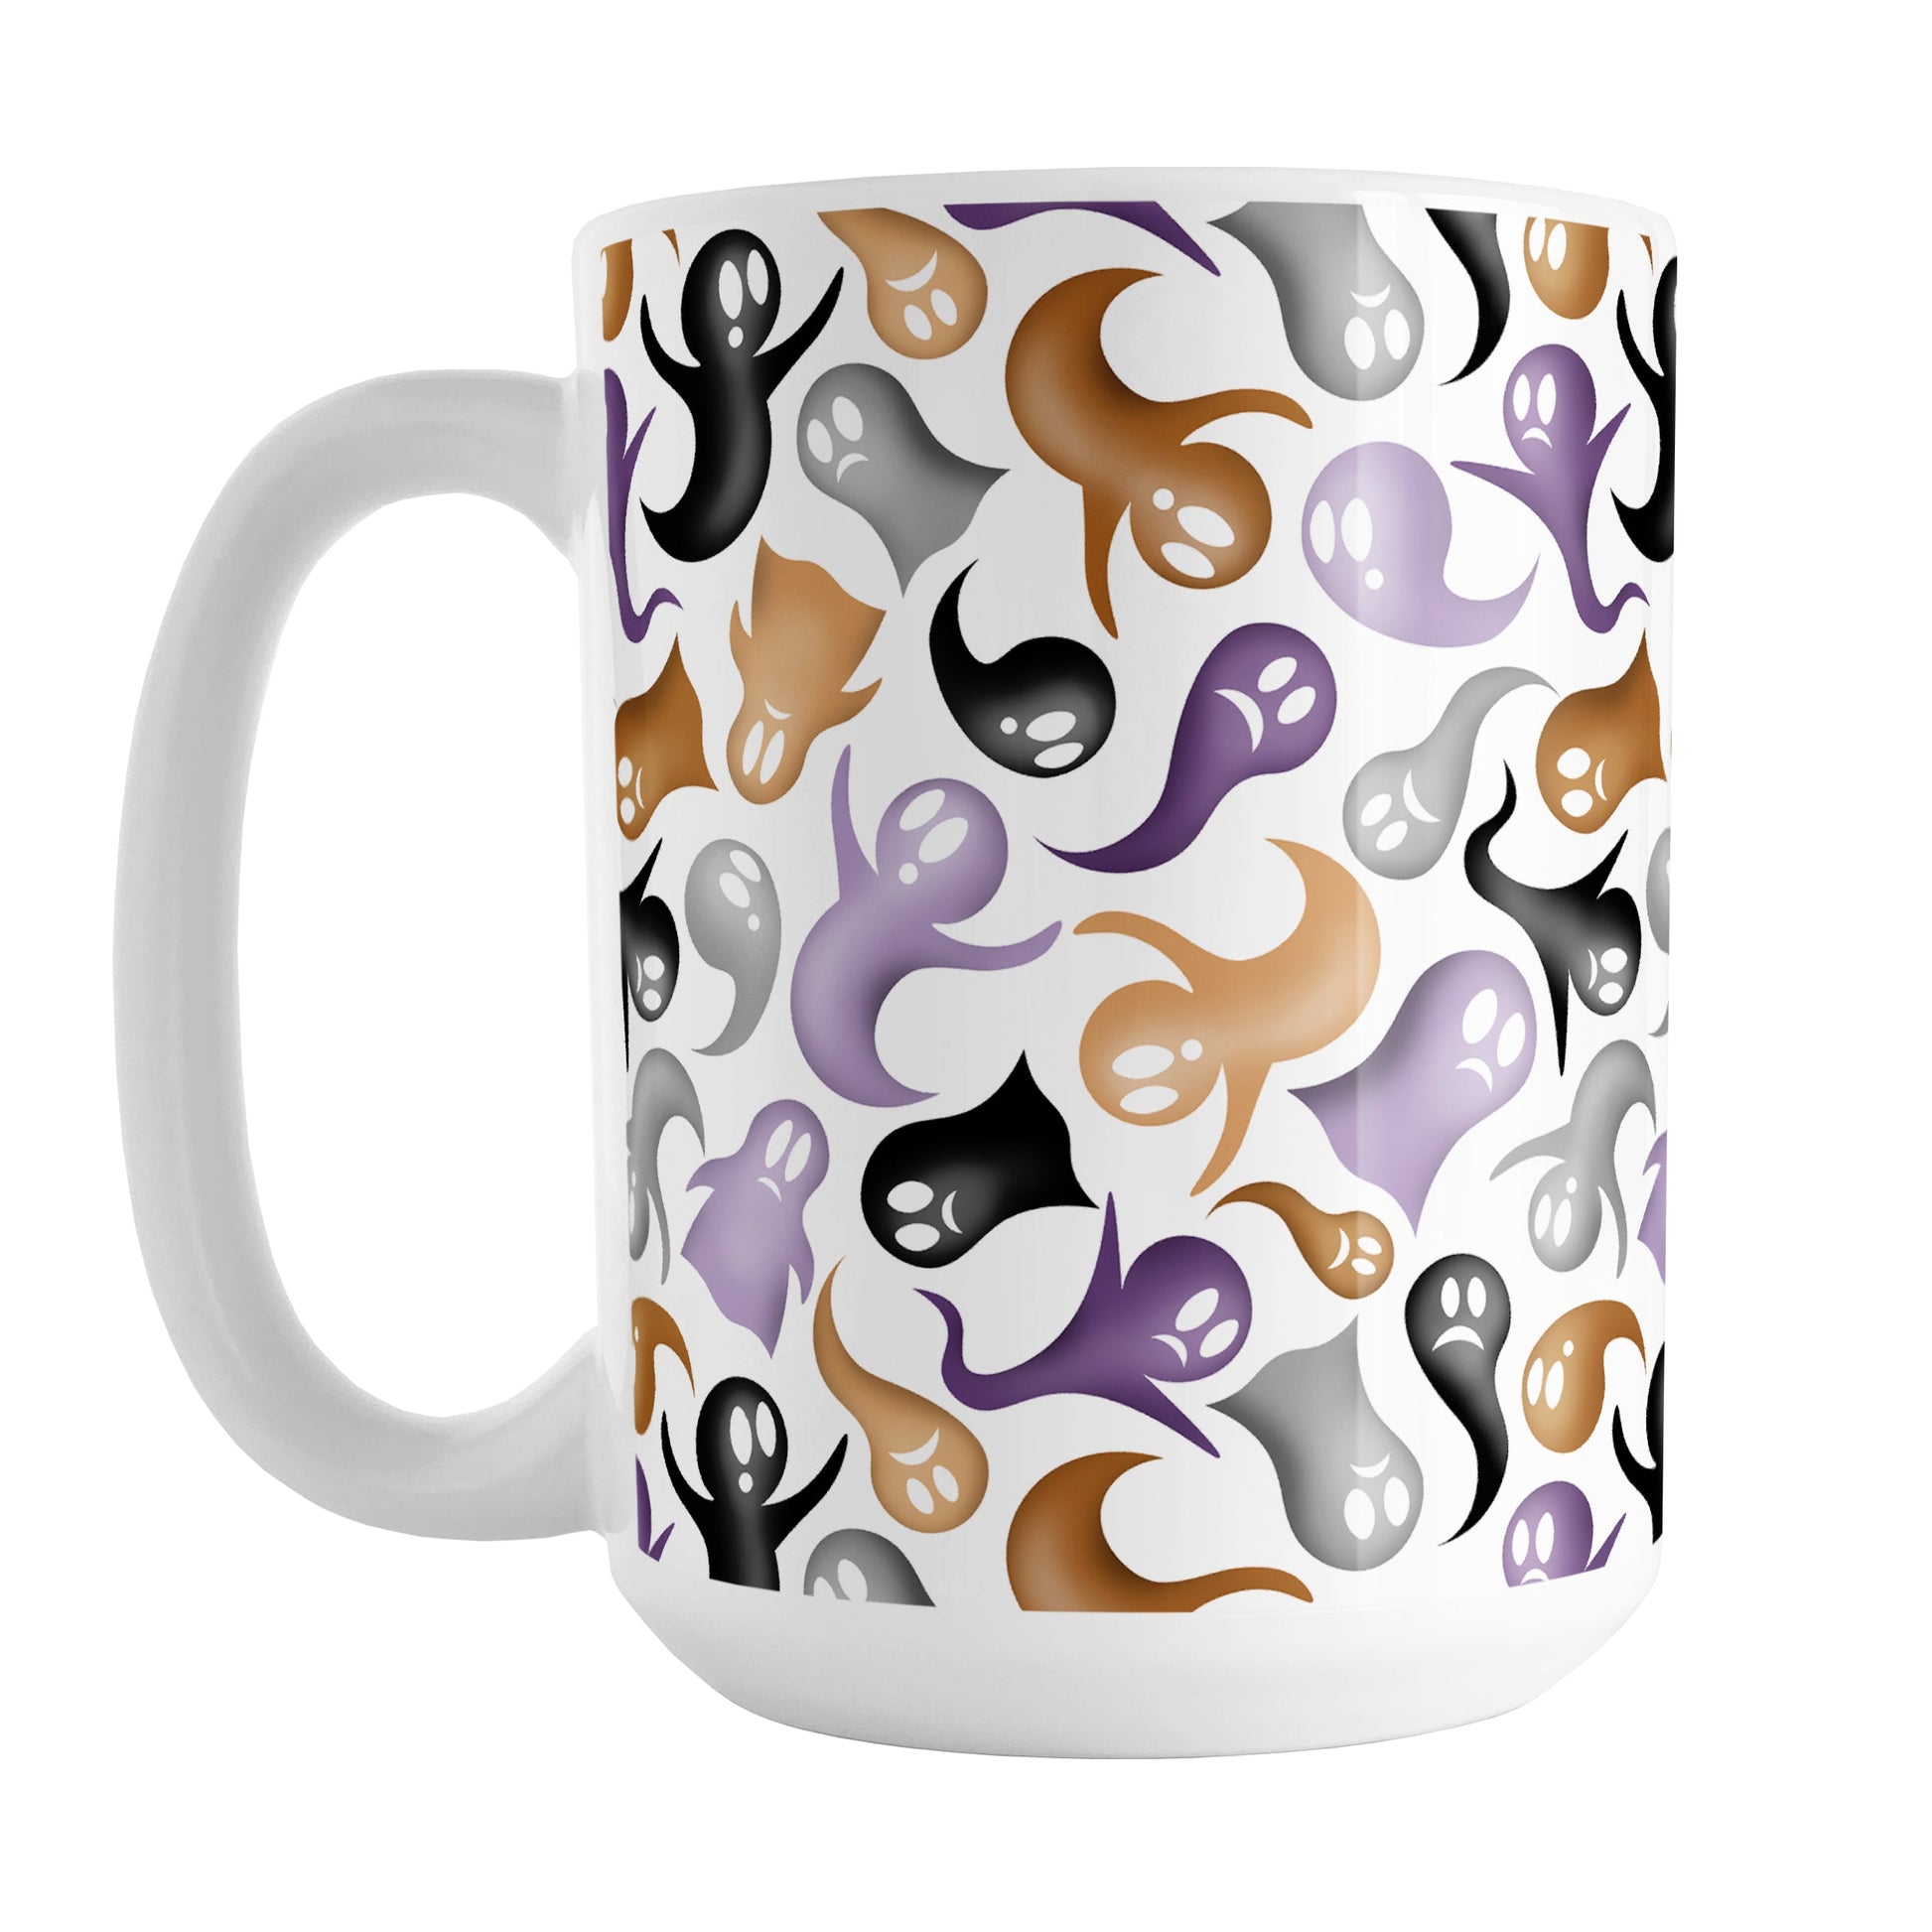 Ghosts and Spirits Halloween Mug (15oz) at Amy's Coffee Mugs. A ceramic coffee mug designed with a whimsical pattern of purple, orange, black and gray ghosts and spirits that wraps around the mug to the handle.